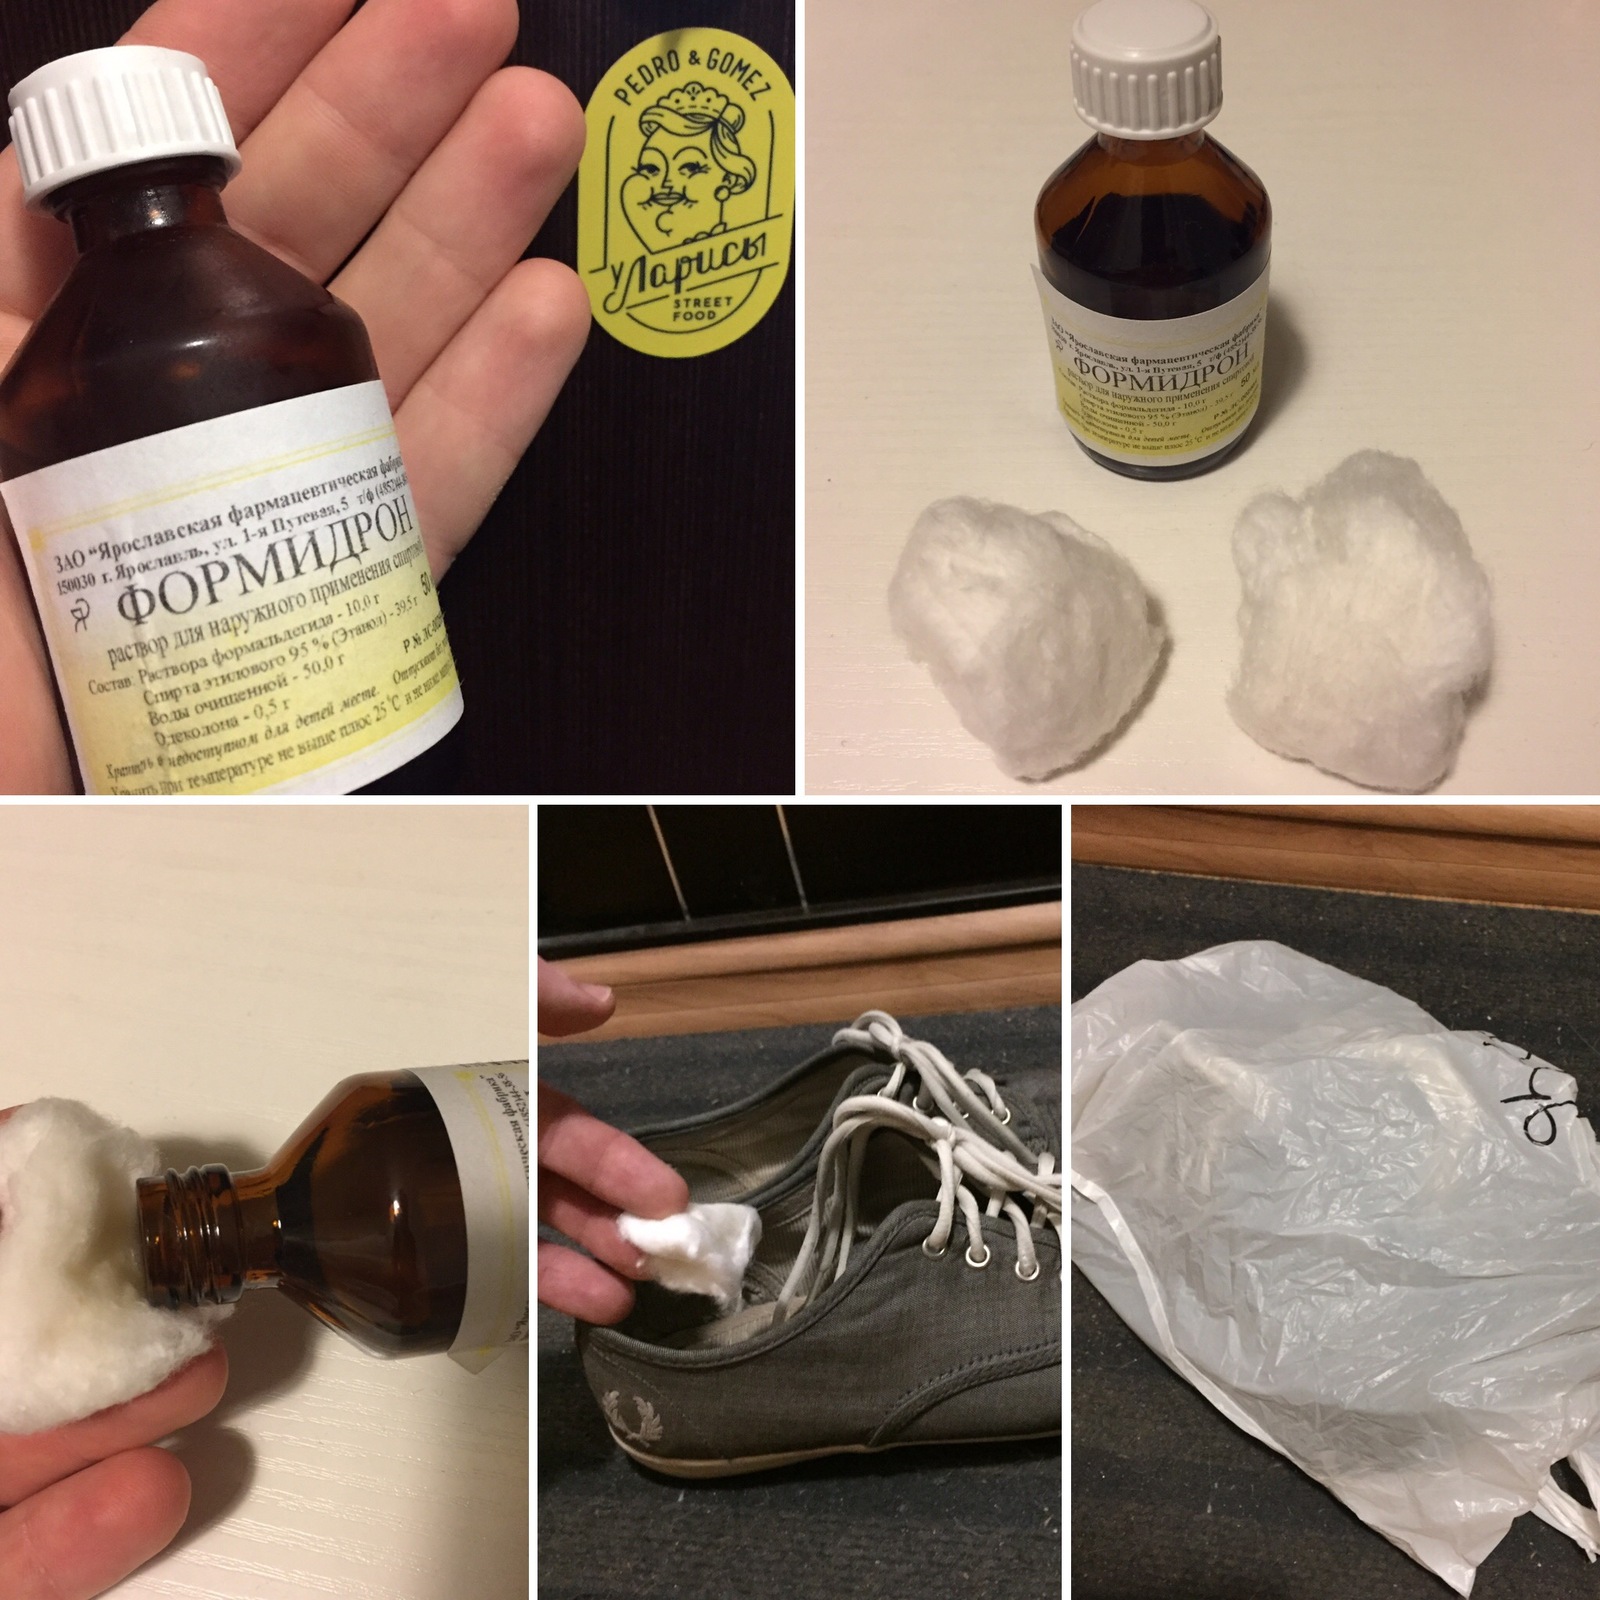 One of the best remedies (IMHO) for shoe odor - My, Foot odor, Stench, FORMIDRON